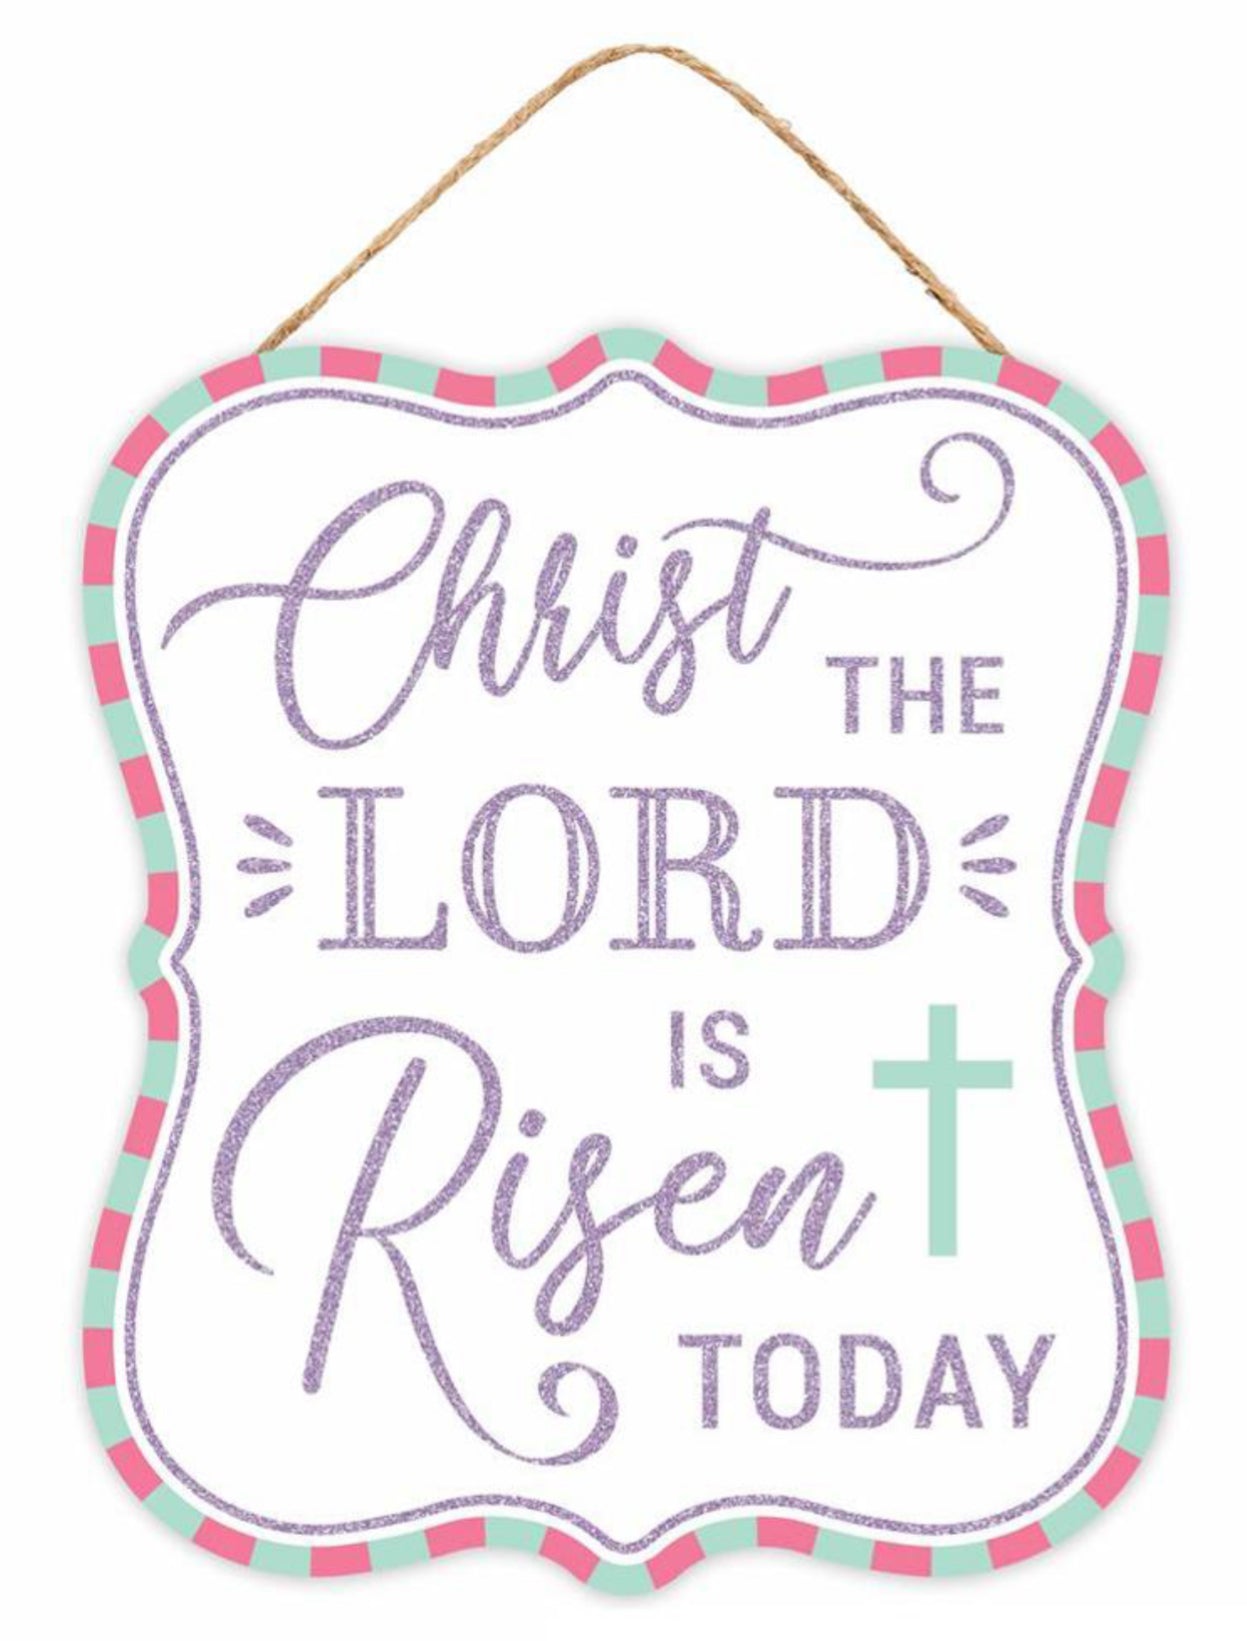 Christ the lord is risen sign - Greenery Marketsigns for wreathsAp8991